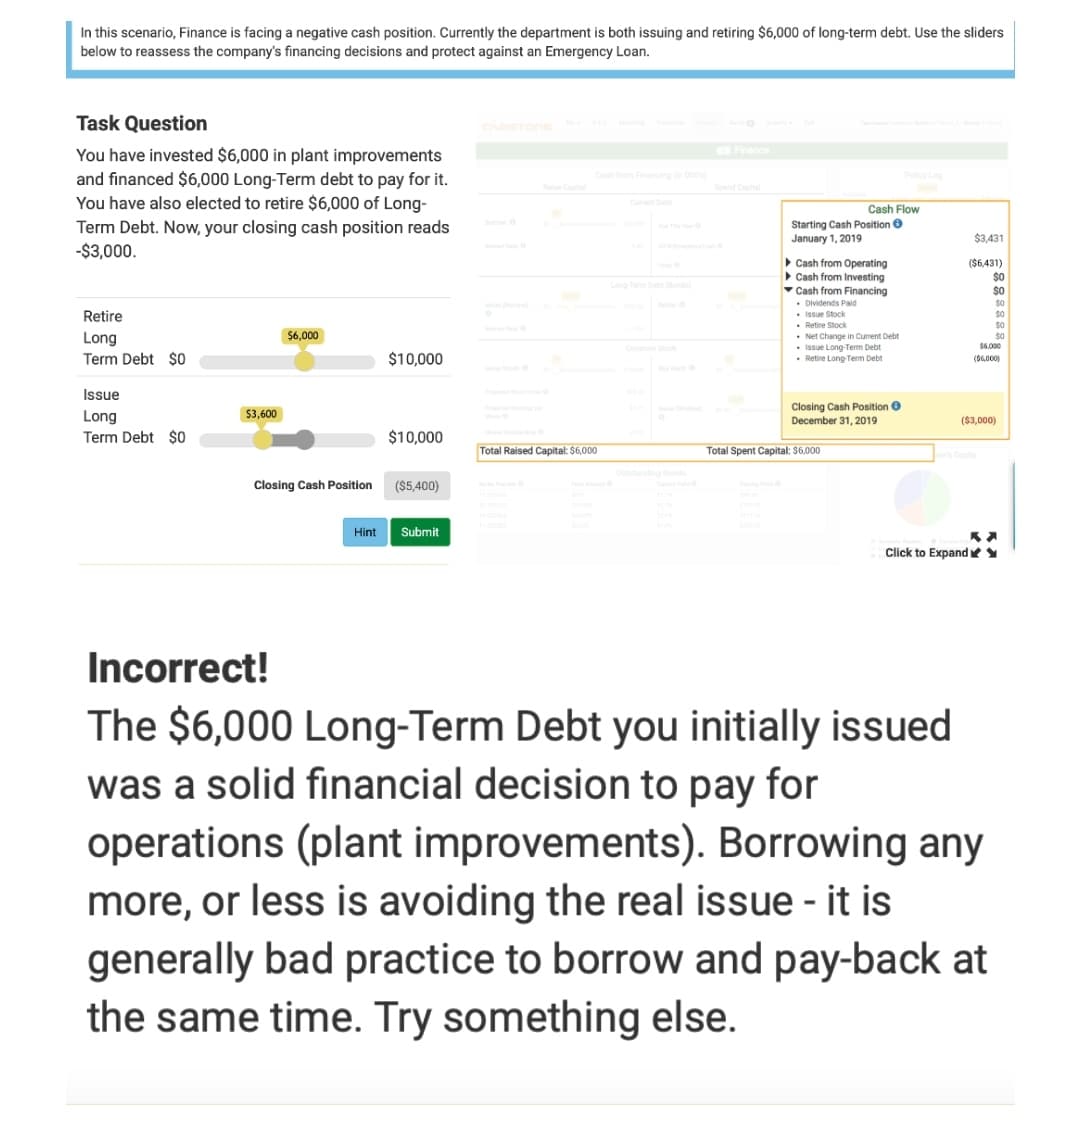 In this scenario, Finance is facing a negative cash position. Currently the department is both issuing and retiring $6,000 of long-term debt. Use the sliders
below to reassess the company's financing decisions and protect against an Emergency Loan.
Task Question
You have invested $6,000 in plant improvements
and financed $6,000 Long-Term debt to pay for it.
You have also elected to retire $6,000 of Long-
Term Debt. Now, your closing cash position reads
-$3,000.
Retire
Long
Term Debt $0
Issue
Long
Term Debt $0
$3,600
$6,000
$10,000
$10,000
Closing Cash Position ($5,400)
Hint Submit
Total Raised Capital: $6,000
Spence
0
Starting Cash Position
January 1, 2019
Cash Flow
Cash from Operating
Cash from Investing
Cash from Financing
. Dividends Paid
• Issue Stock
. Retire Stock
.Net Change in Cument Debt
• Issue Long-Term Debt
. Retire Long-Term Debt
Closing Cash Position
December 31, 2019
Total Spent Capital: $6,000
$3,431
($6,431)
$0
SO
$0
$0
$0
$0
$6,000
($6,000)
($3,000)
K
Click to Expand✓
Incorrect!
The $6,000 Long-Term Debt you initially issued
was a solid financial decision to pay for
operations (plant improvements). Borrowing any
more, or less is avoiding the real issue - it is
generally bad practice to borrow and pay-back at
the same time. Try something else.